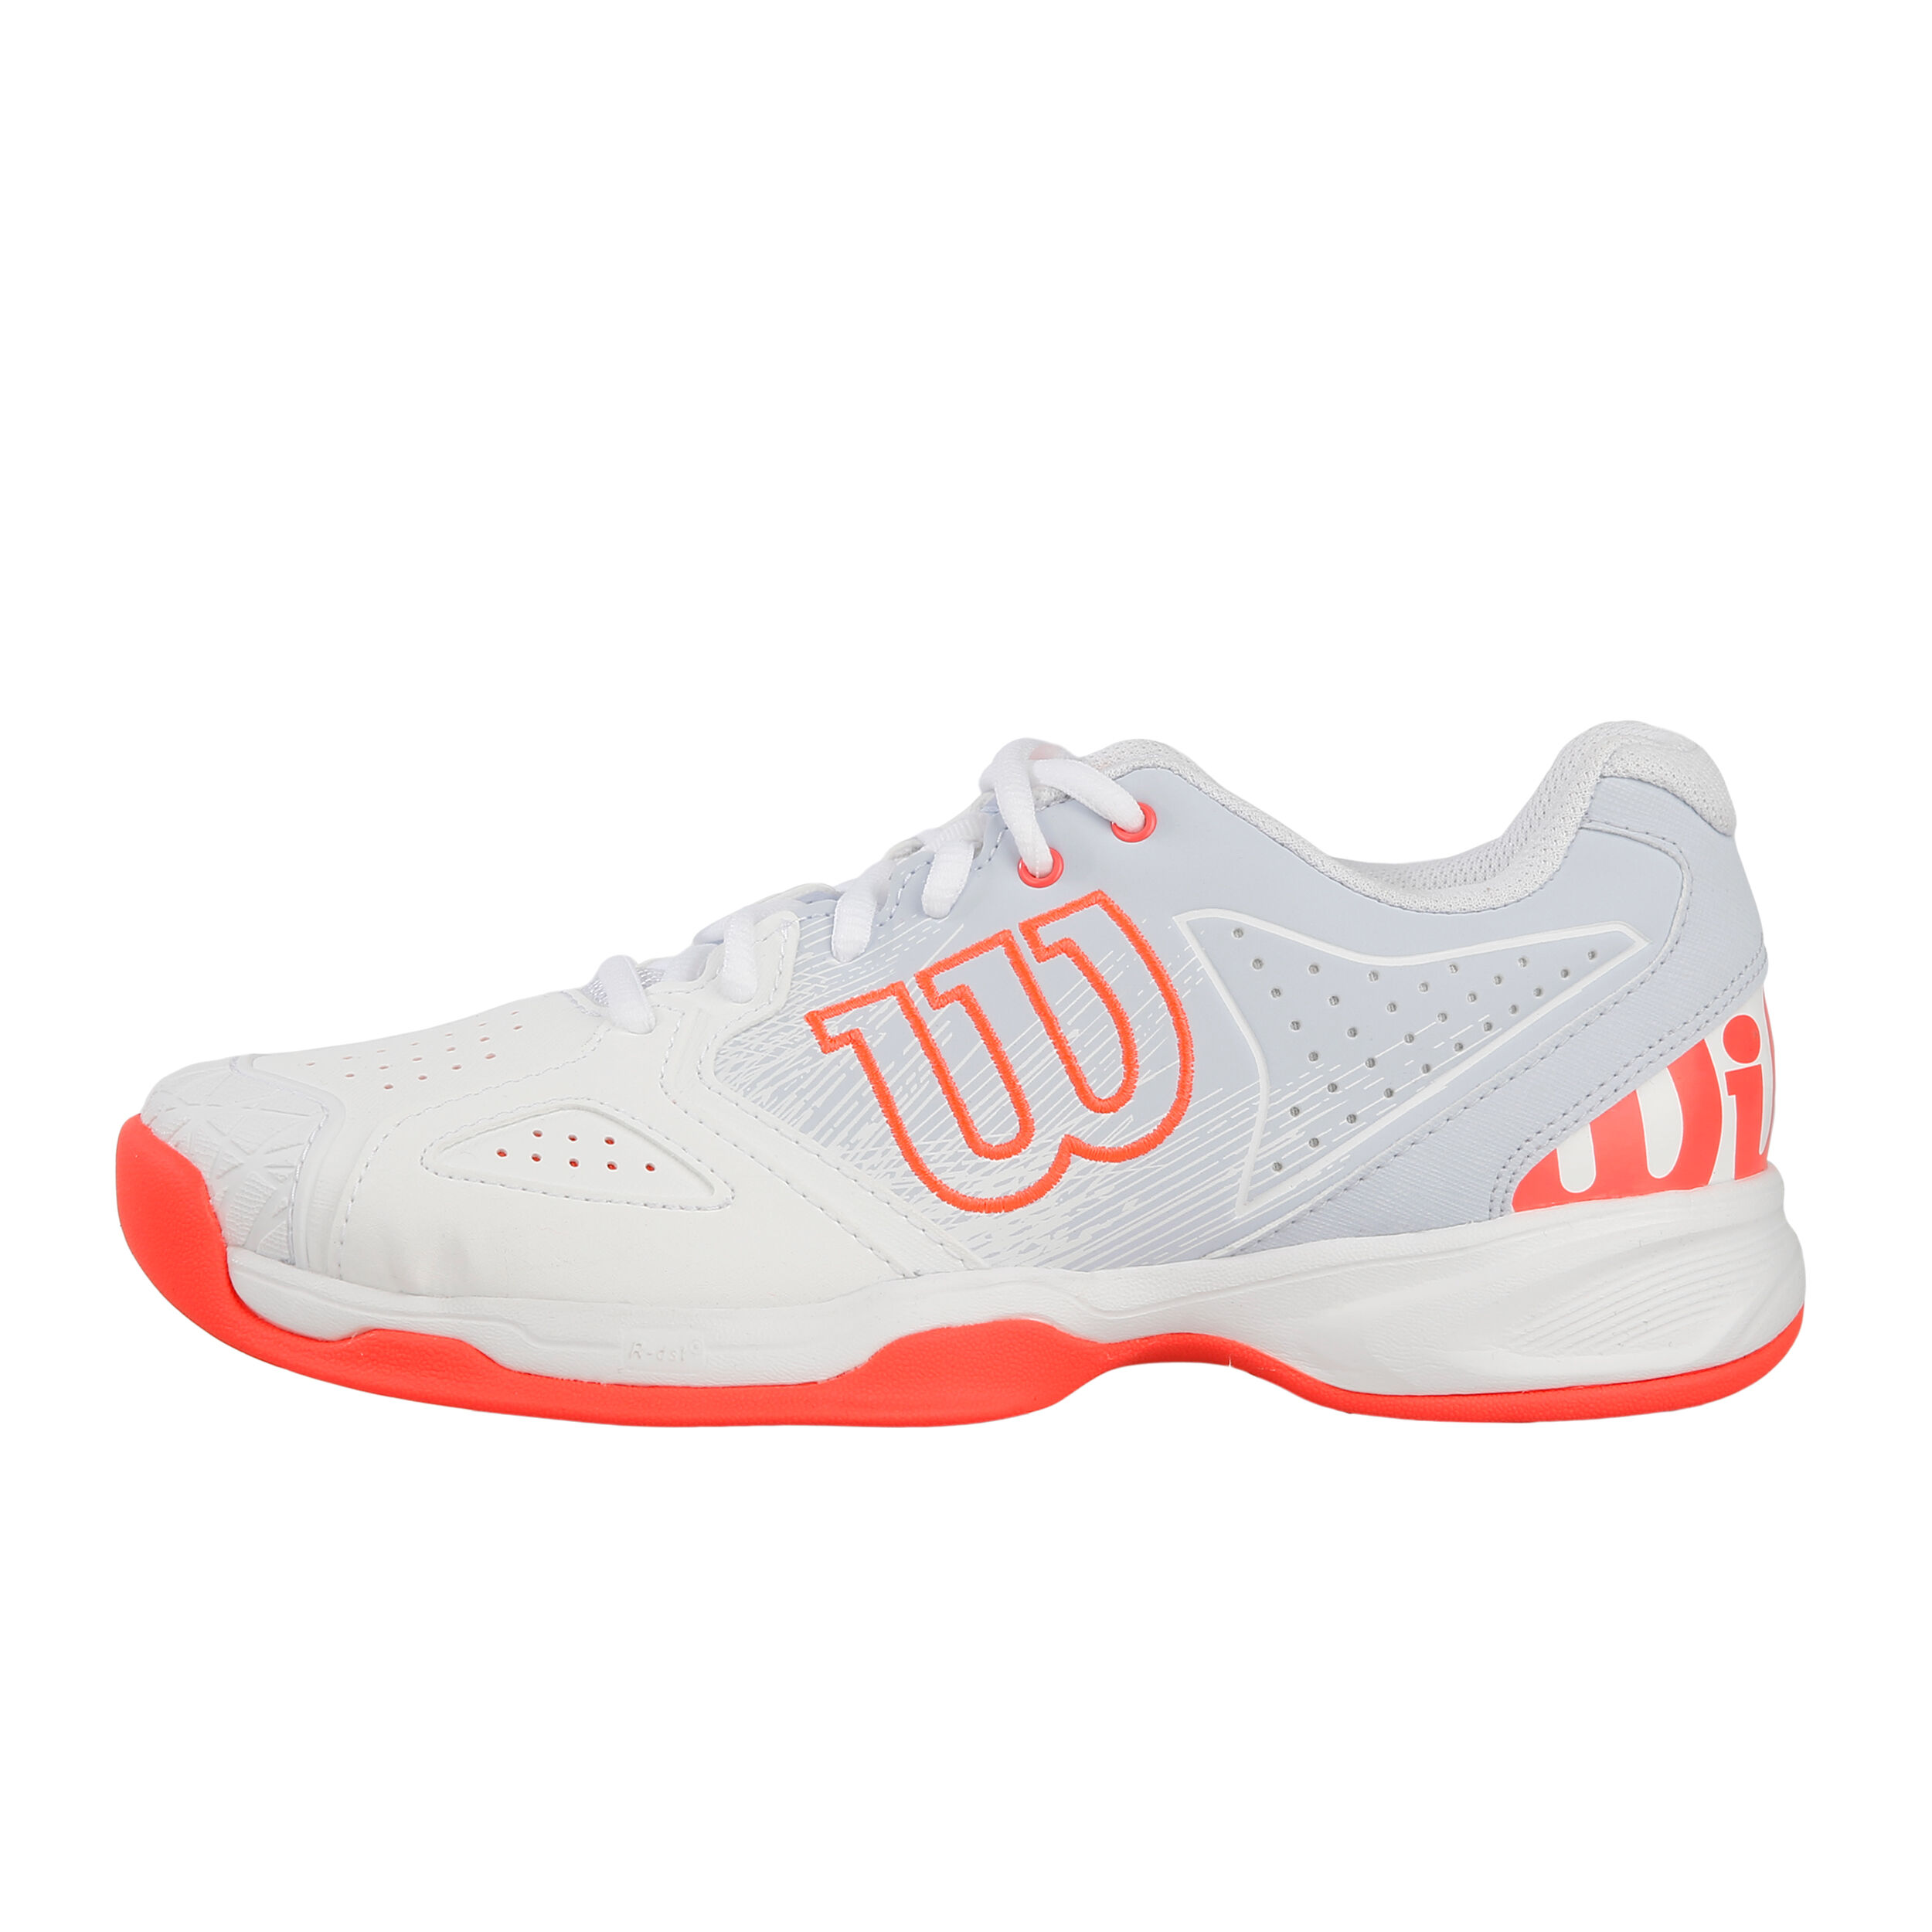 Synthetic Indoor/Carpet KAOS DEVO CARPET W Wilson Women's Tennis Shoes for All Types of Player 